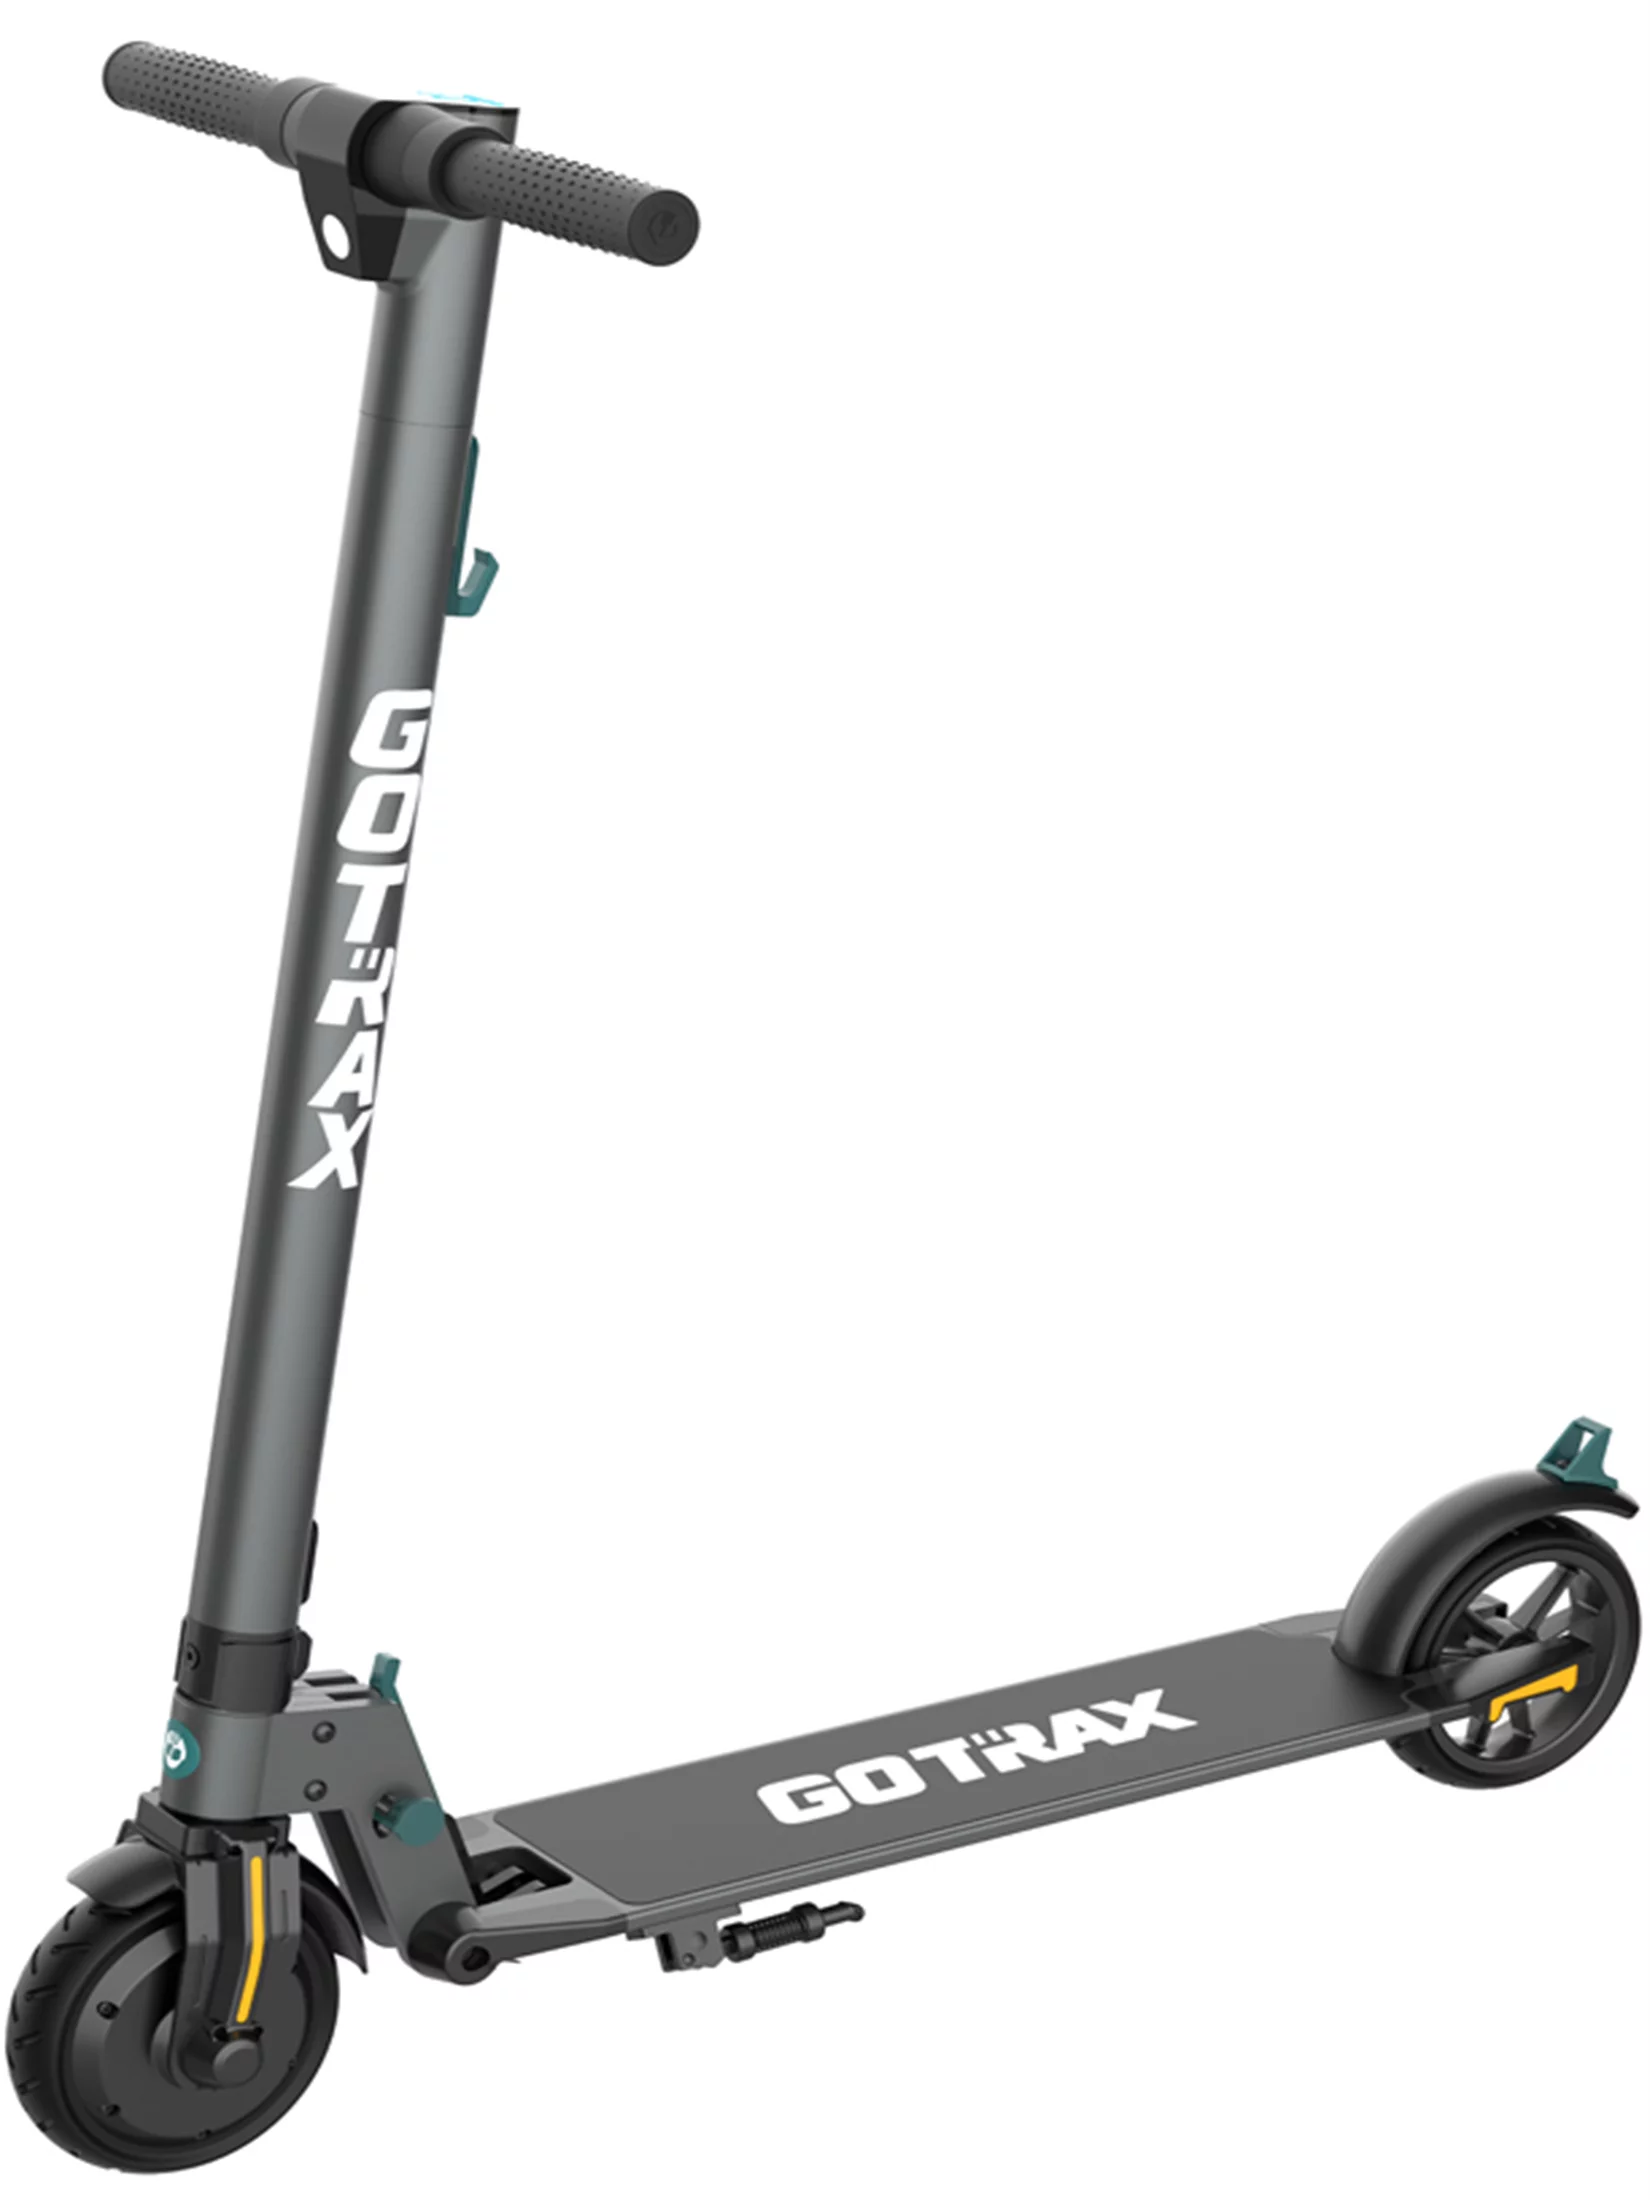 GoTrax - Did you know you can lock up your scooter directly from